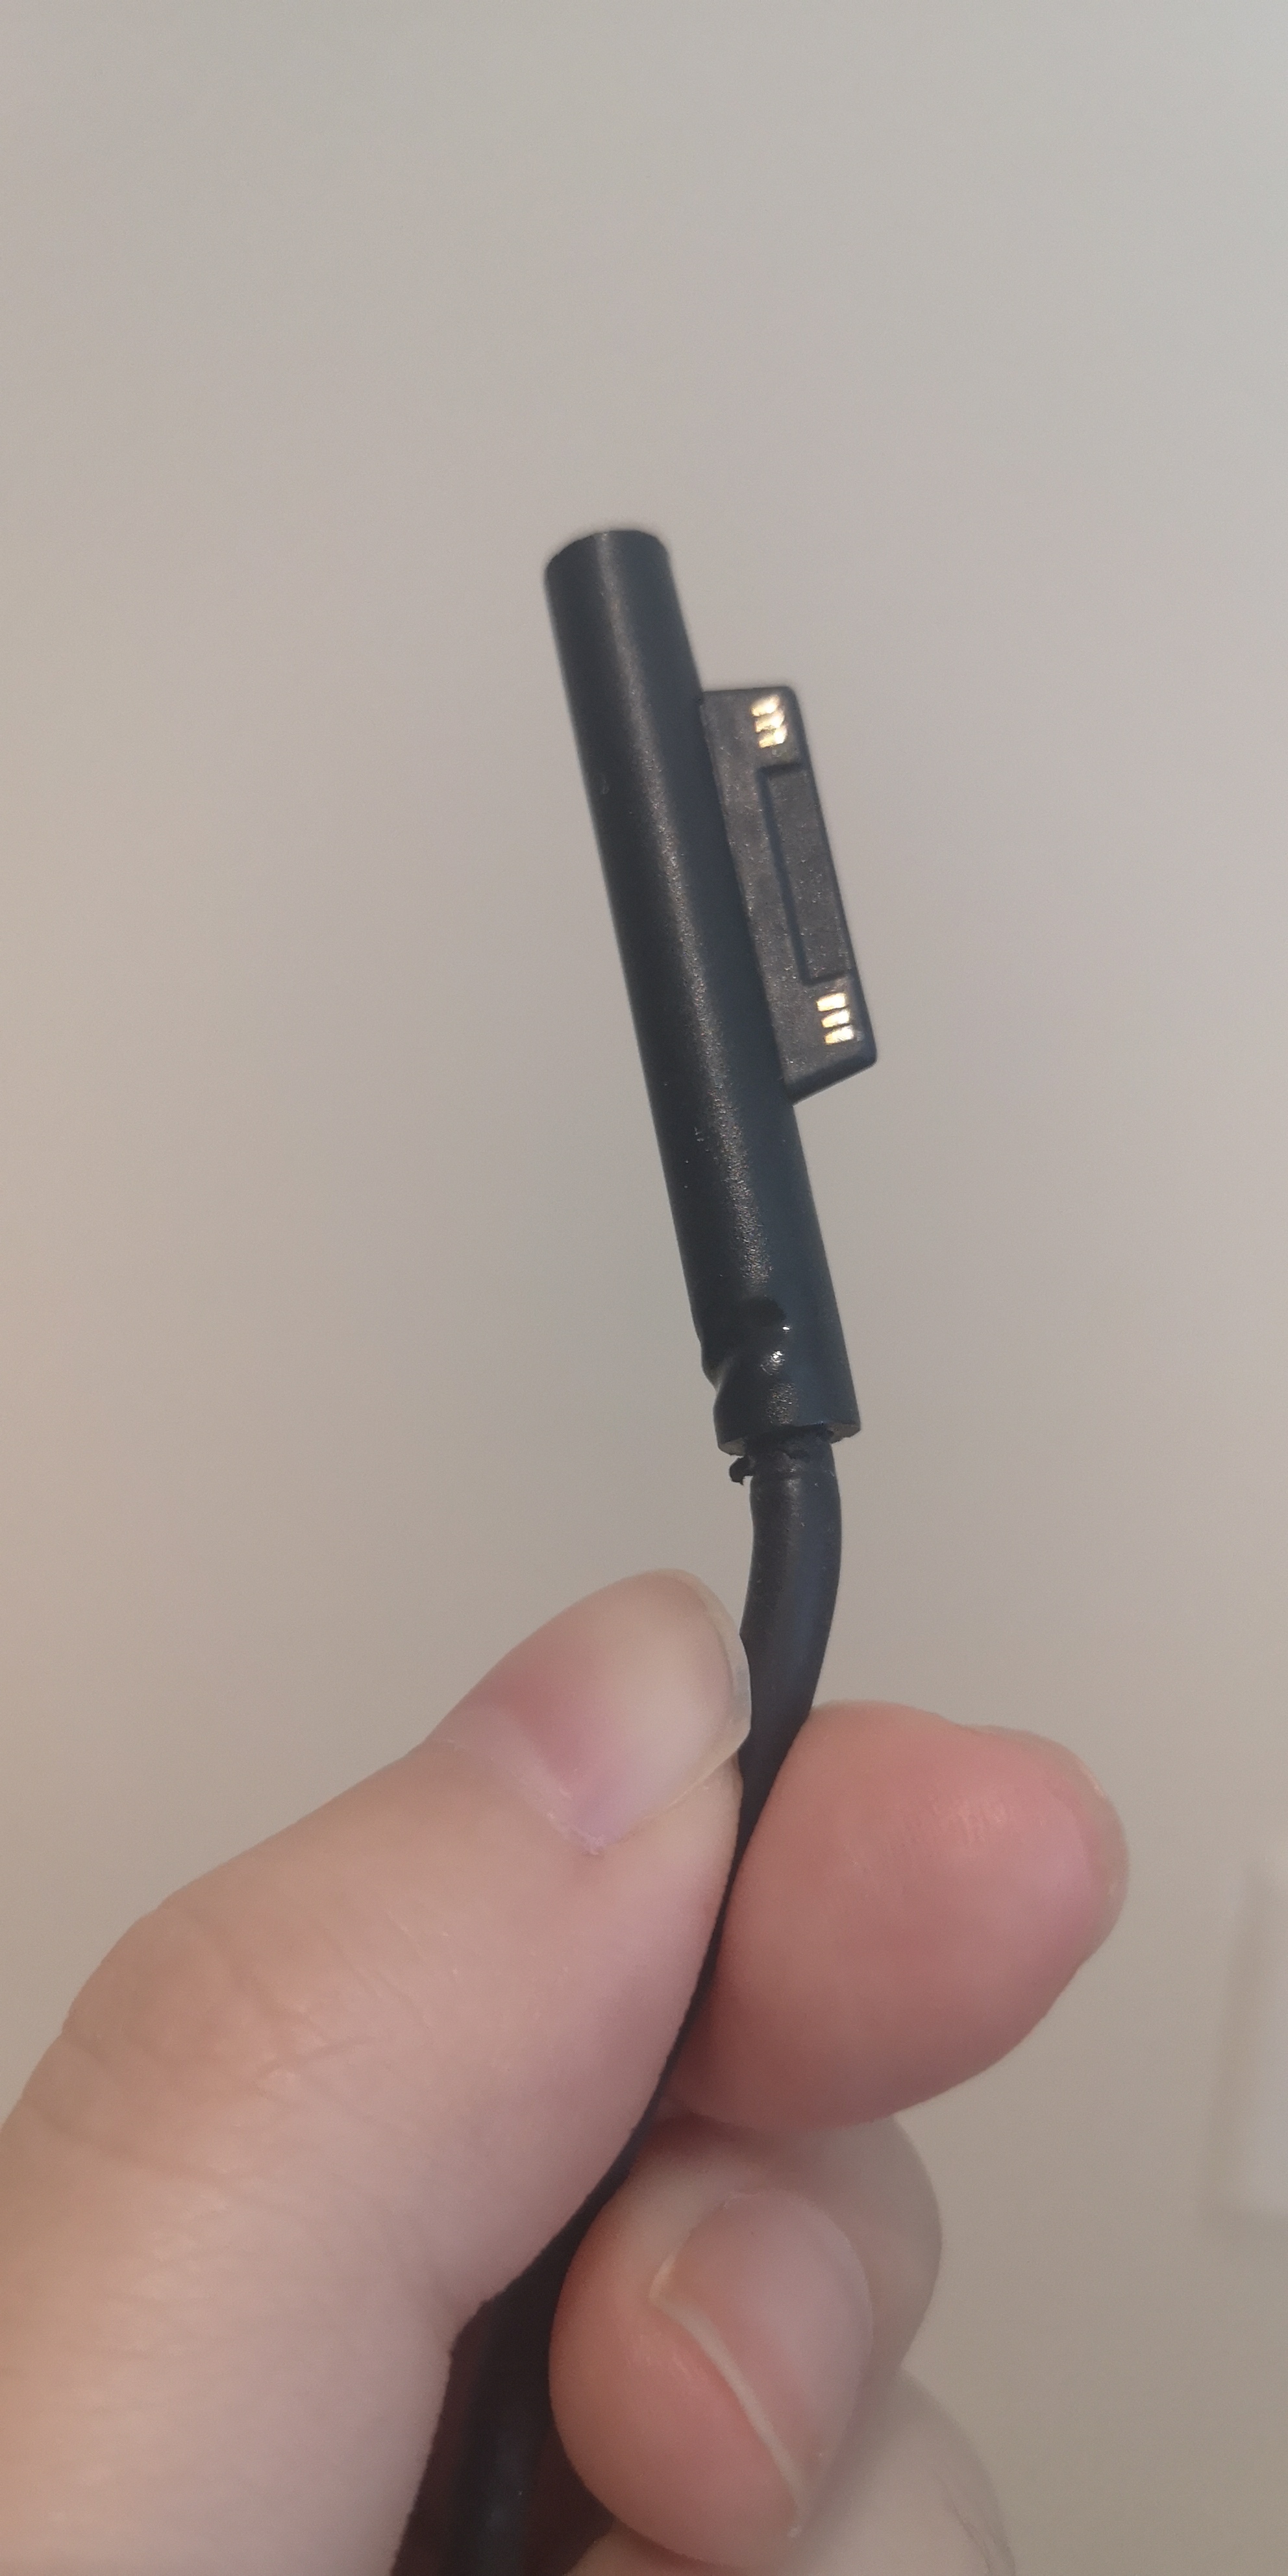 Surface Pro 4 Melting Power Cord at Device Connecting Part - Microsoft  Community